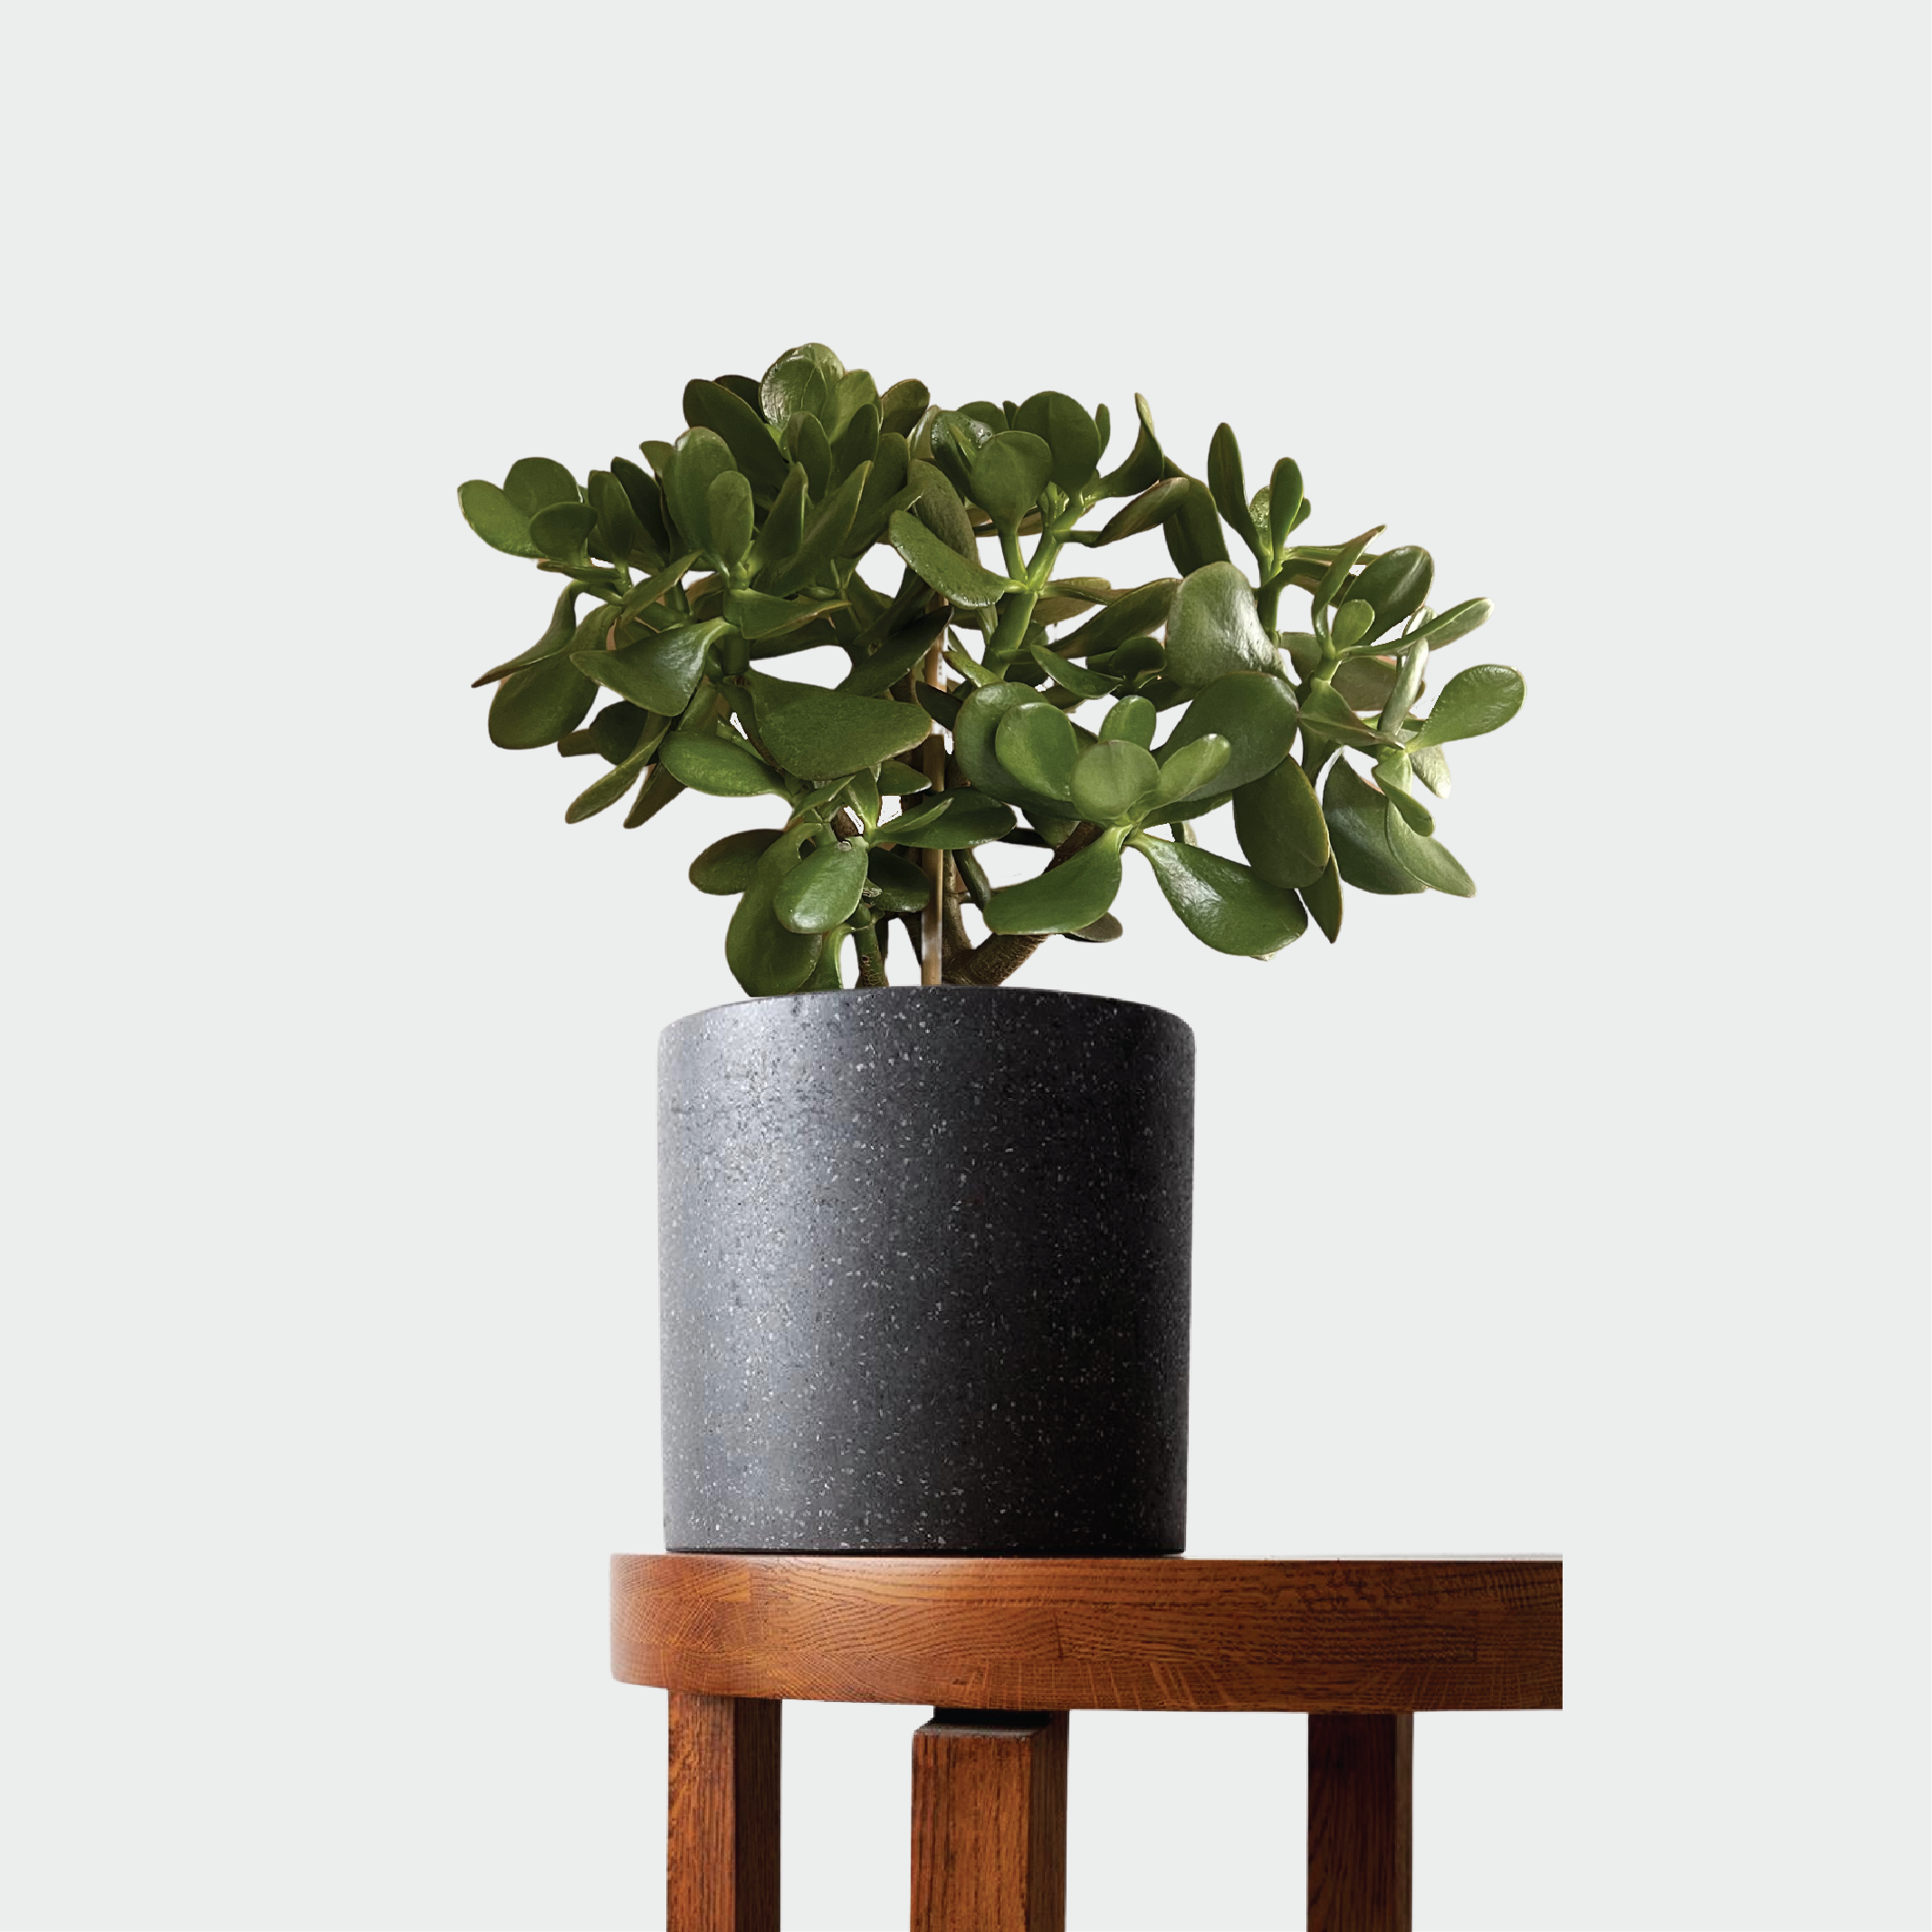 A Crassula ovata, commonly known as a jade plant, positioned in a black pot on a table.